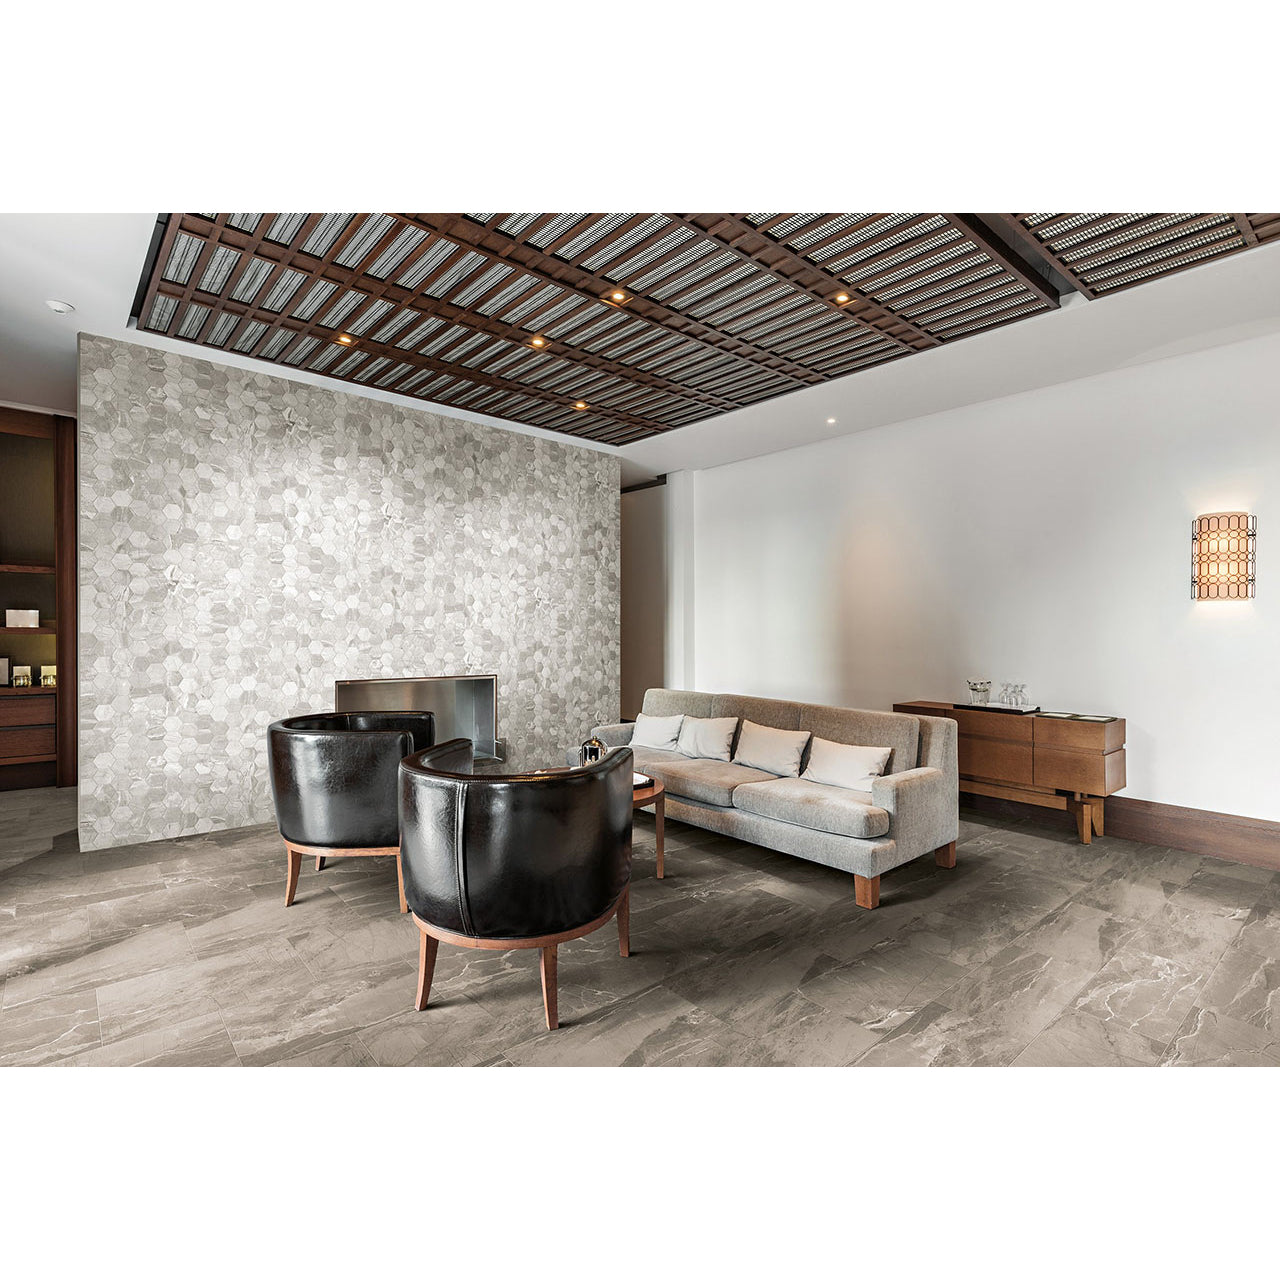 Floors 2000 - Absolute 12 in. x 24 in. Matte Porcelain Tile - Taupe